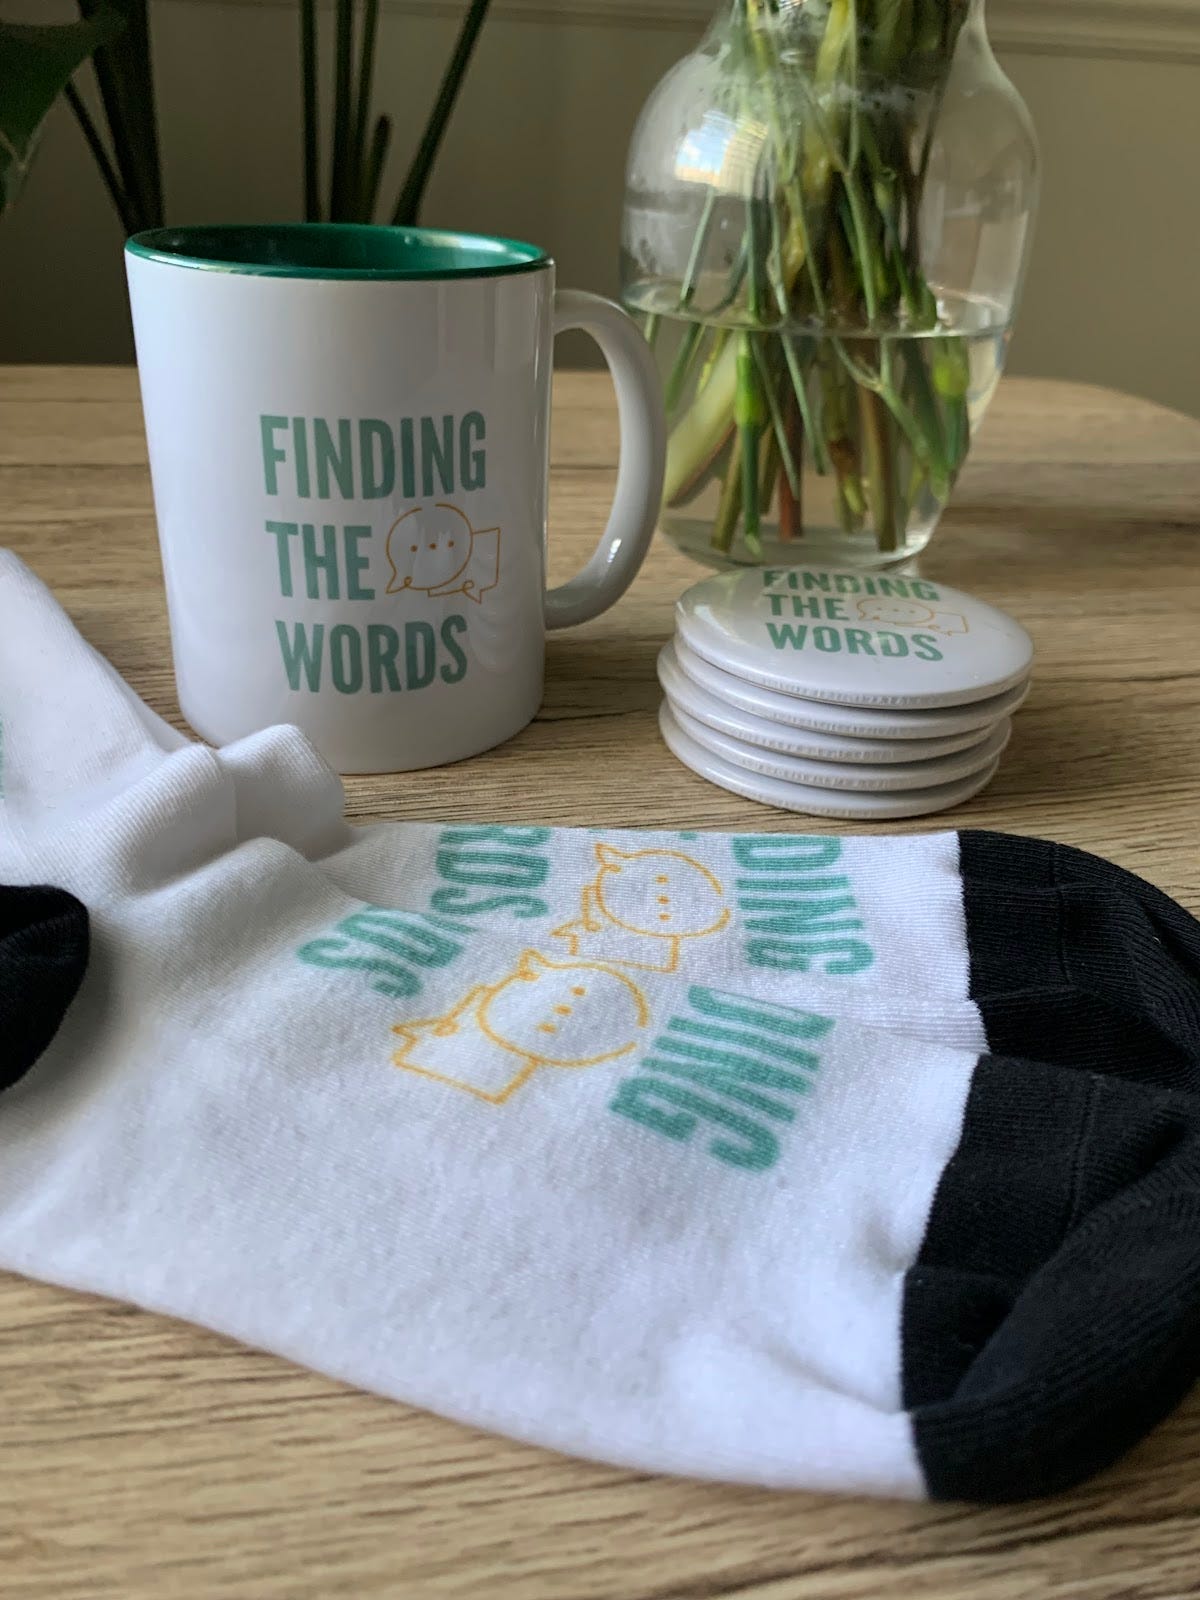 A white mug with a green interior, a stack of six circular magnets and a pair of socks on a wooden table. They are all white with “Finding the Words” written in green along with an orange drawing of text message bubbles–it is the logo for Finding the Words. There is a vase and a plant in the background.